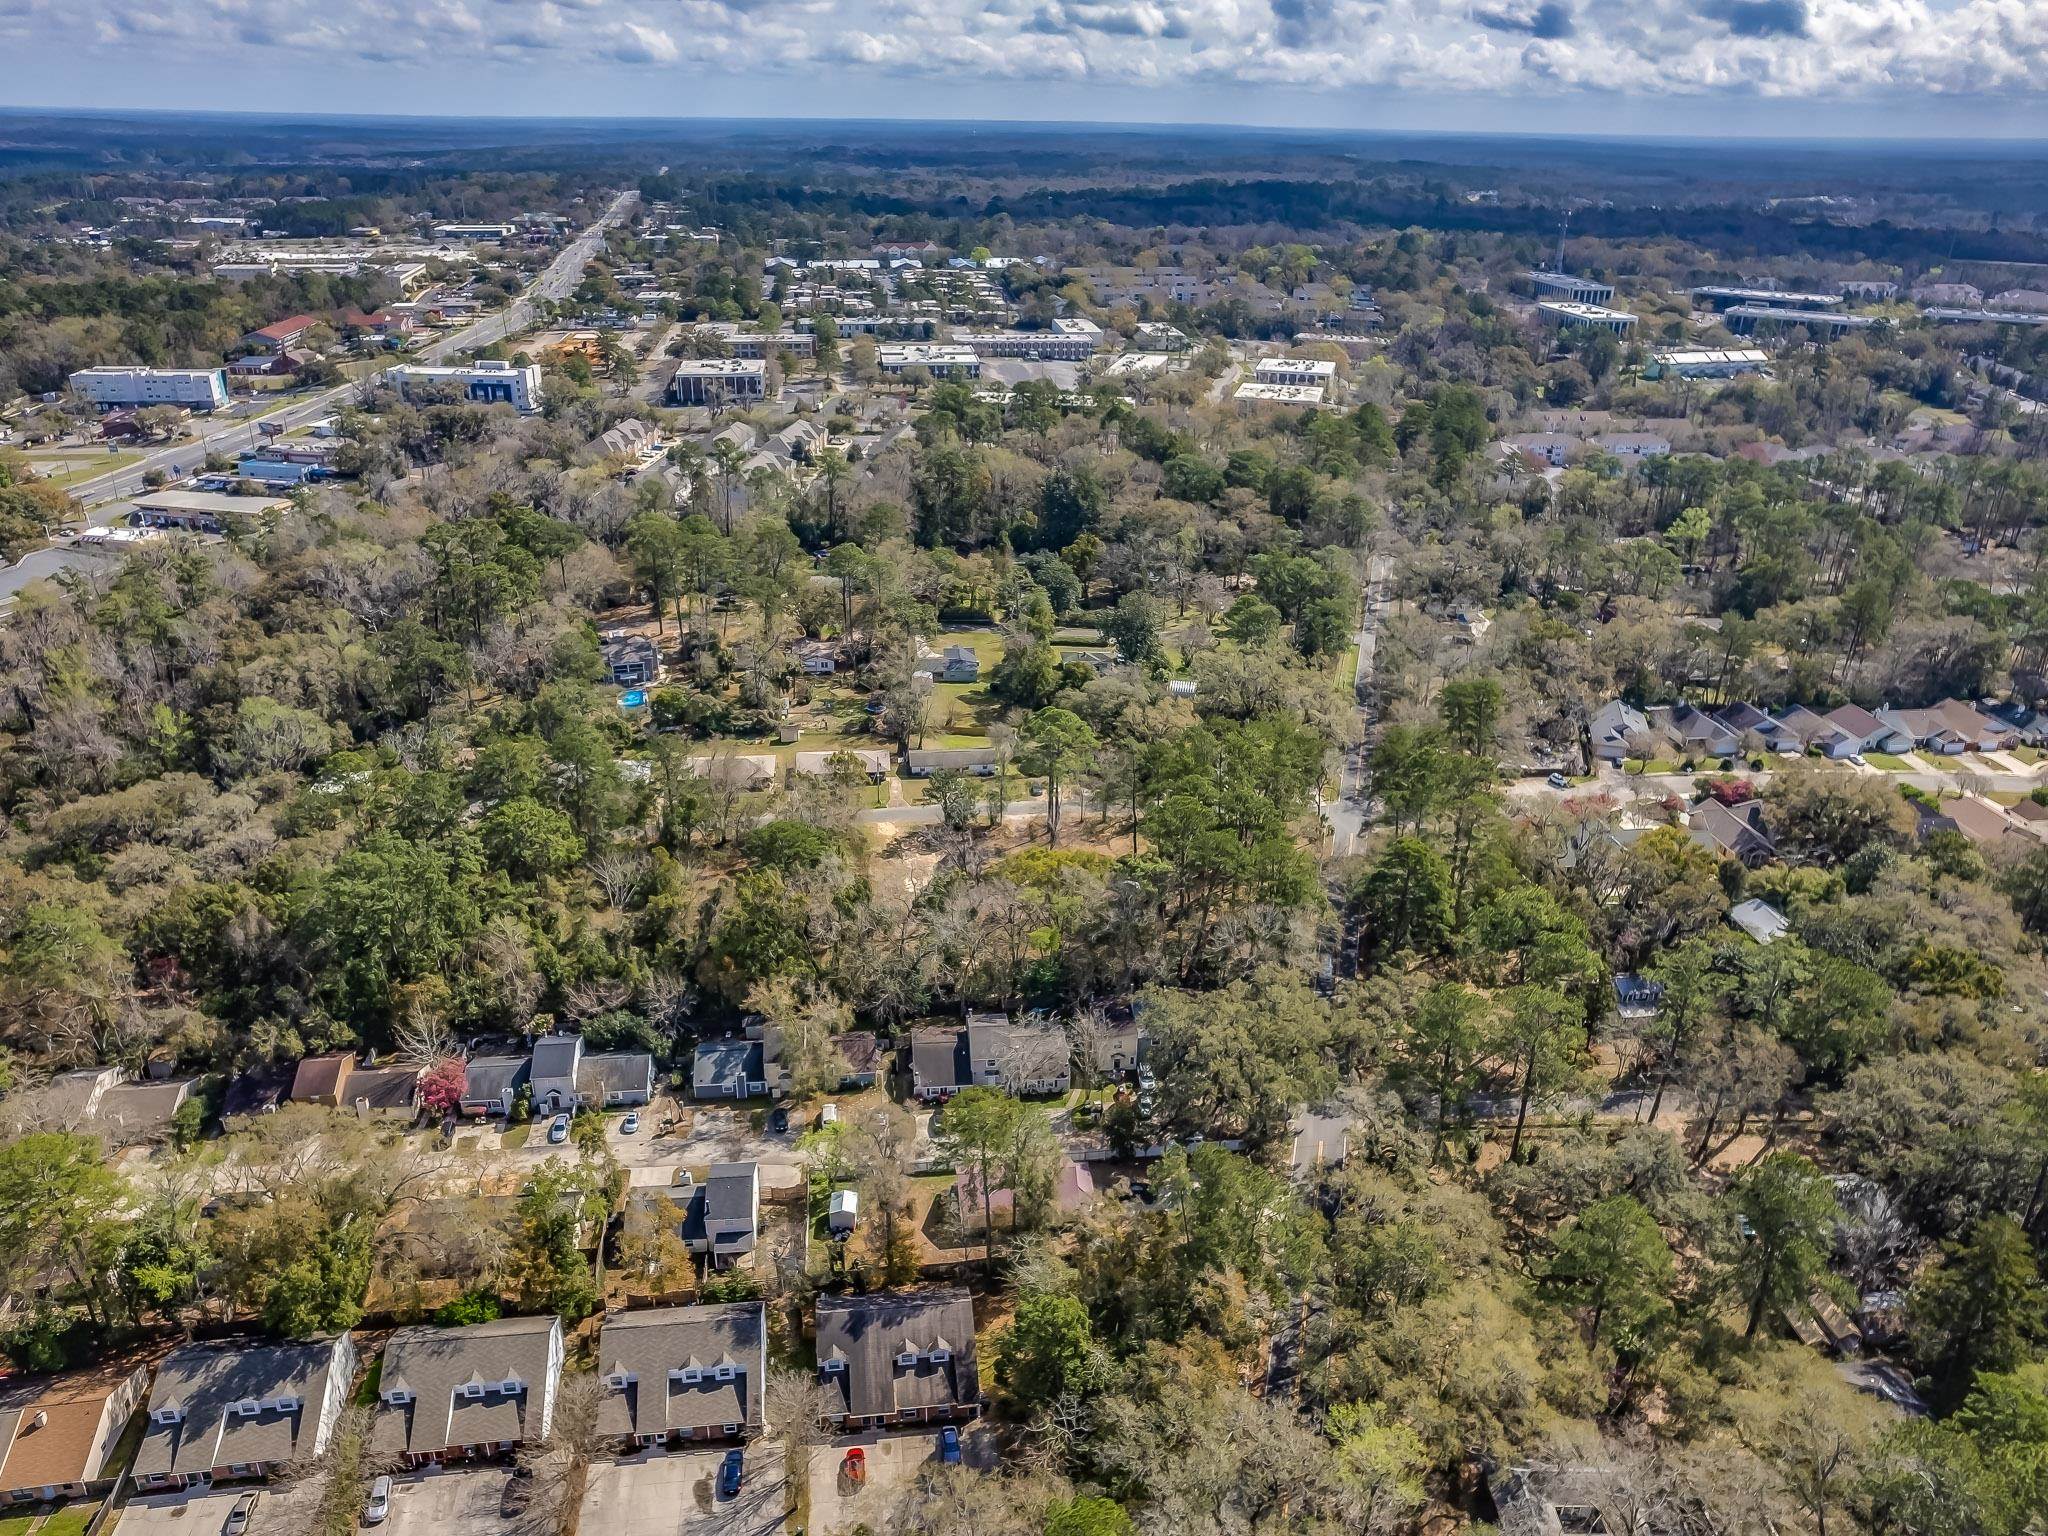 1452 Fisher,TALLAHASSEE,Florida 32301,Lots and land,Fisher,366440